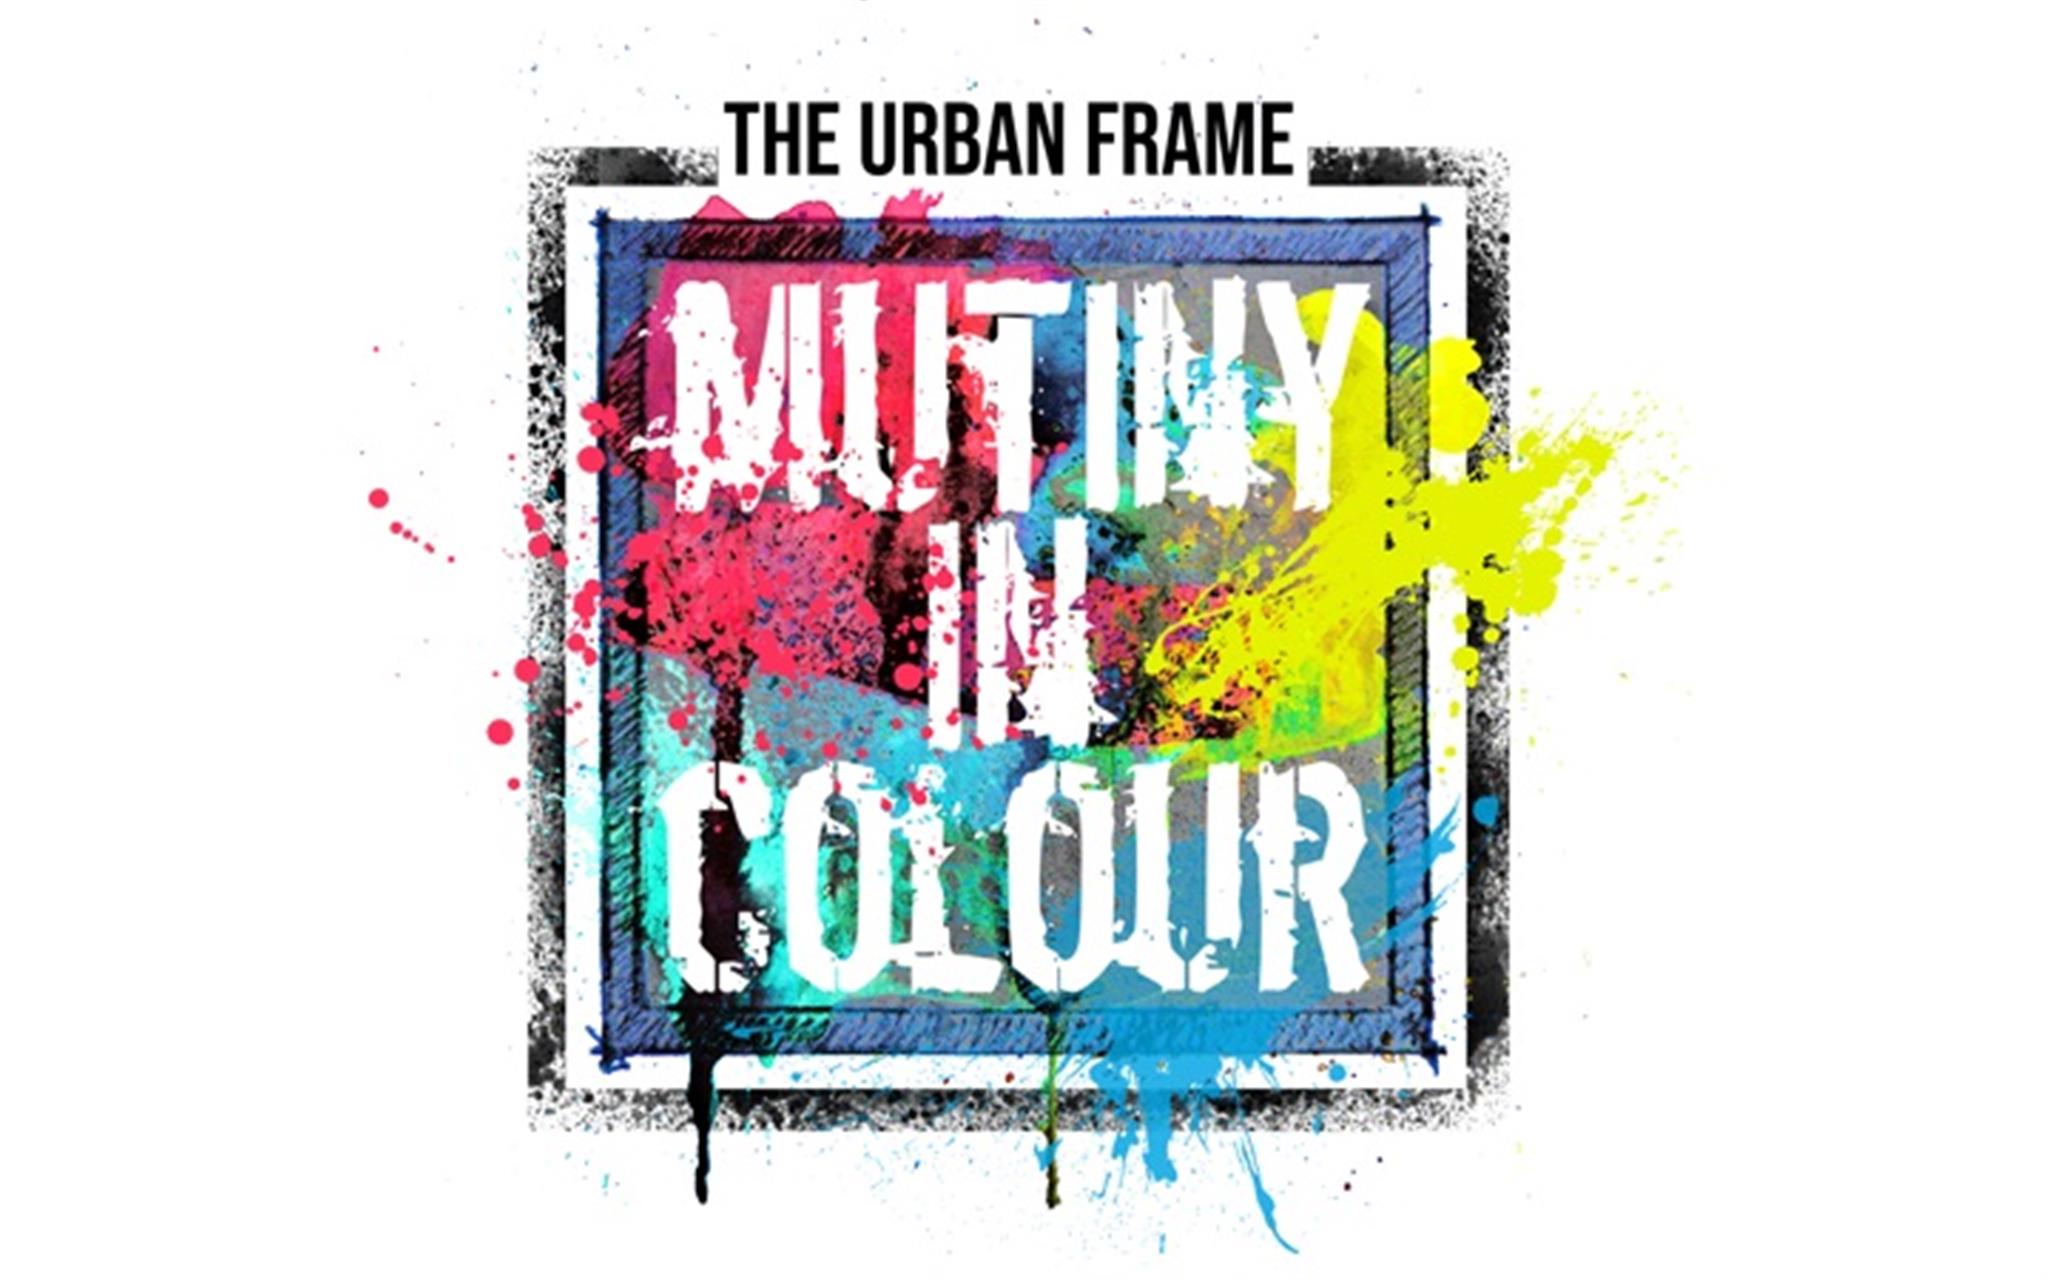 The Urban Frame: Mutiny in Colour